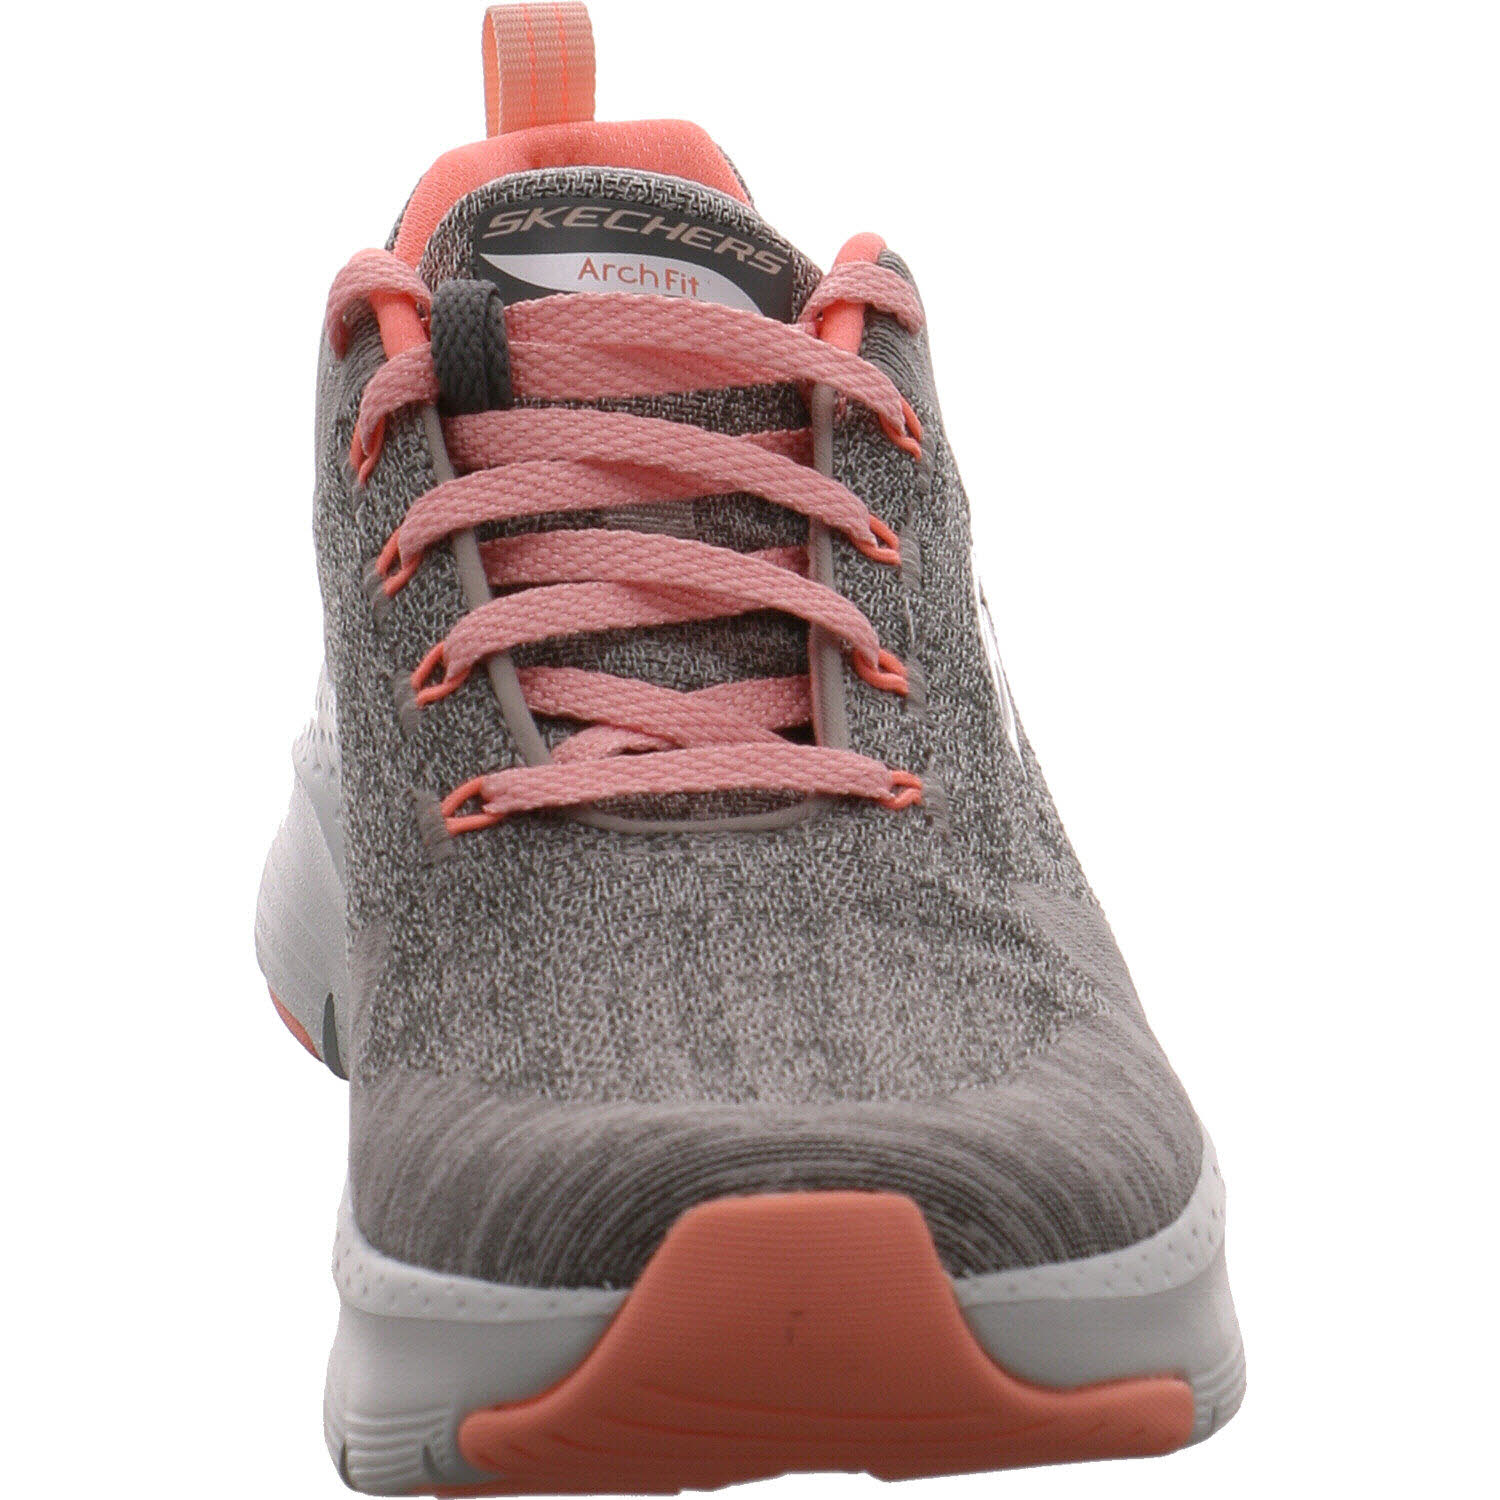 Skechers Sneaker low Arch Fit Comfy Wave